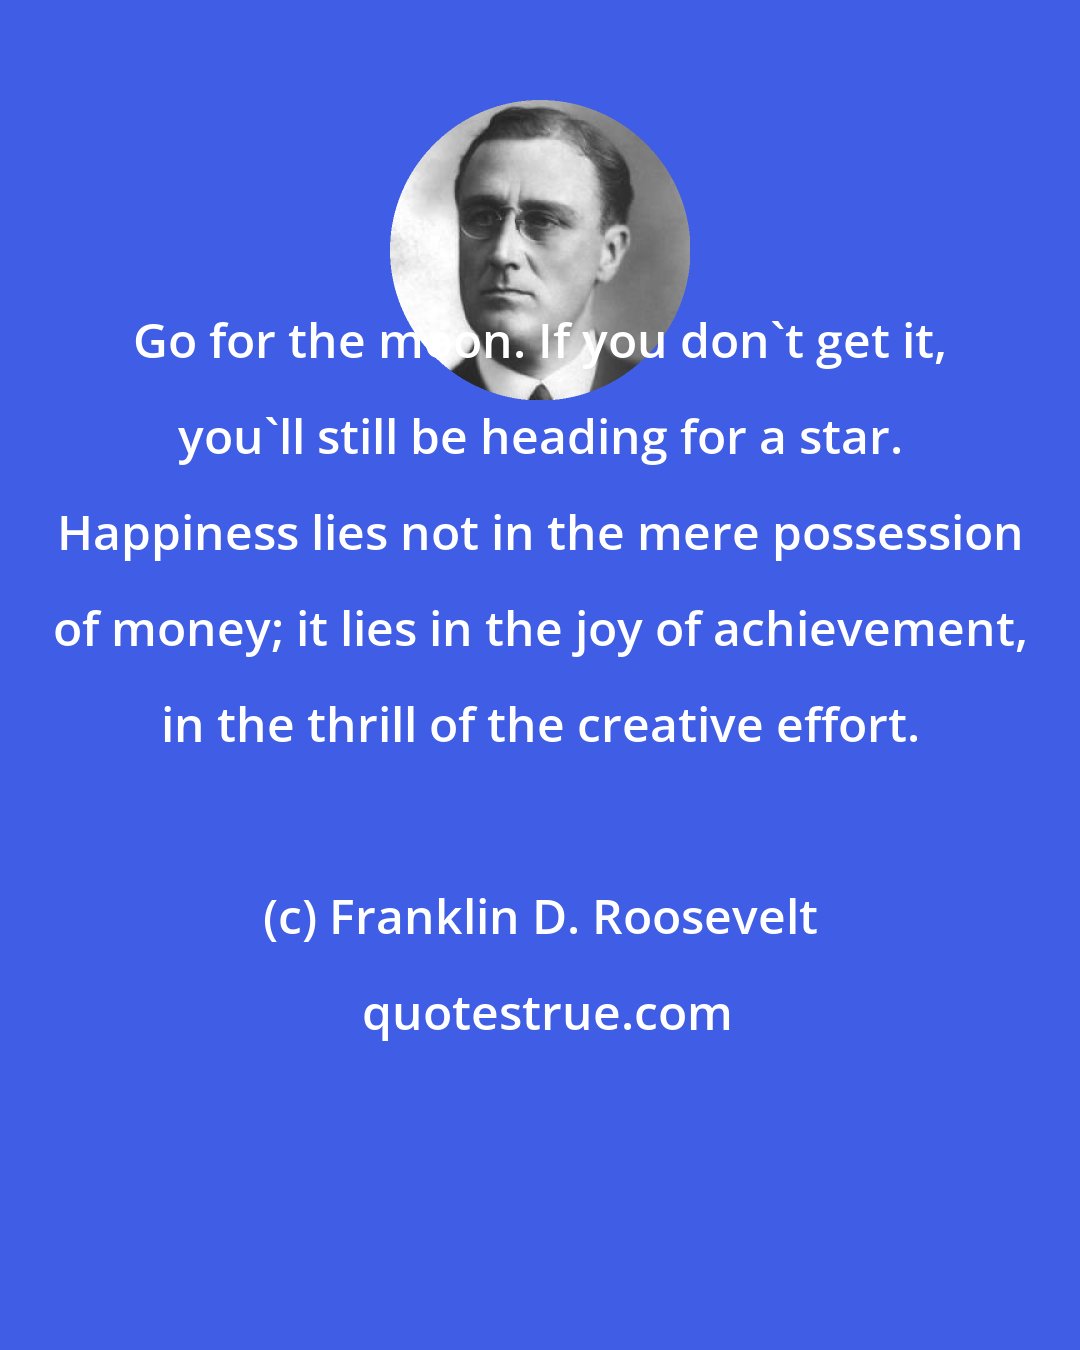 Franklin D. Roosevelt: Go for the moon. If you don't get it, you'll still be heading for a star. Happiness lies not in the mere possession of money; it lies in the joy of achievement, in the thrill of the creative effort.